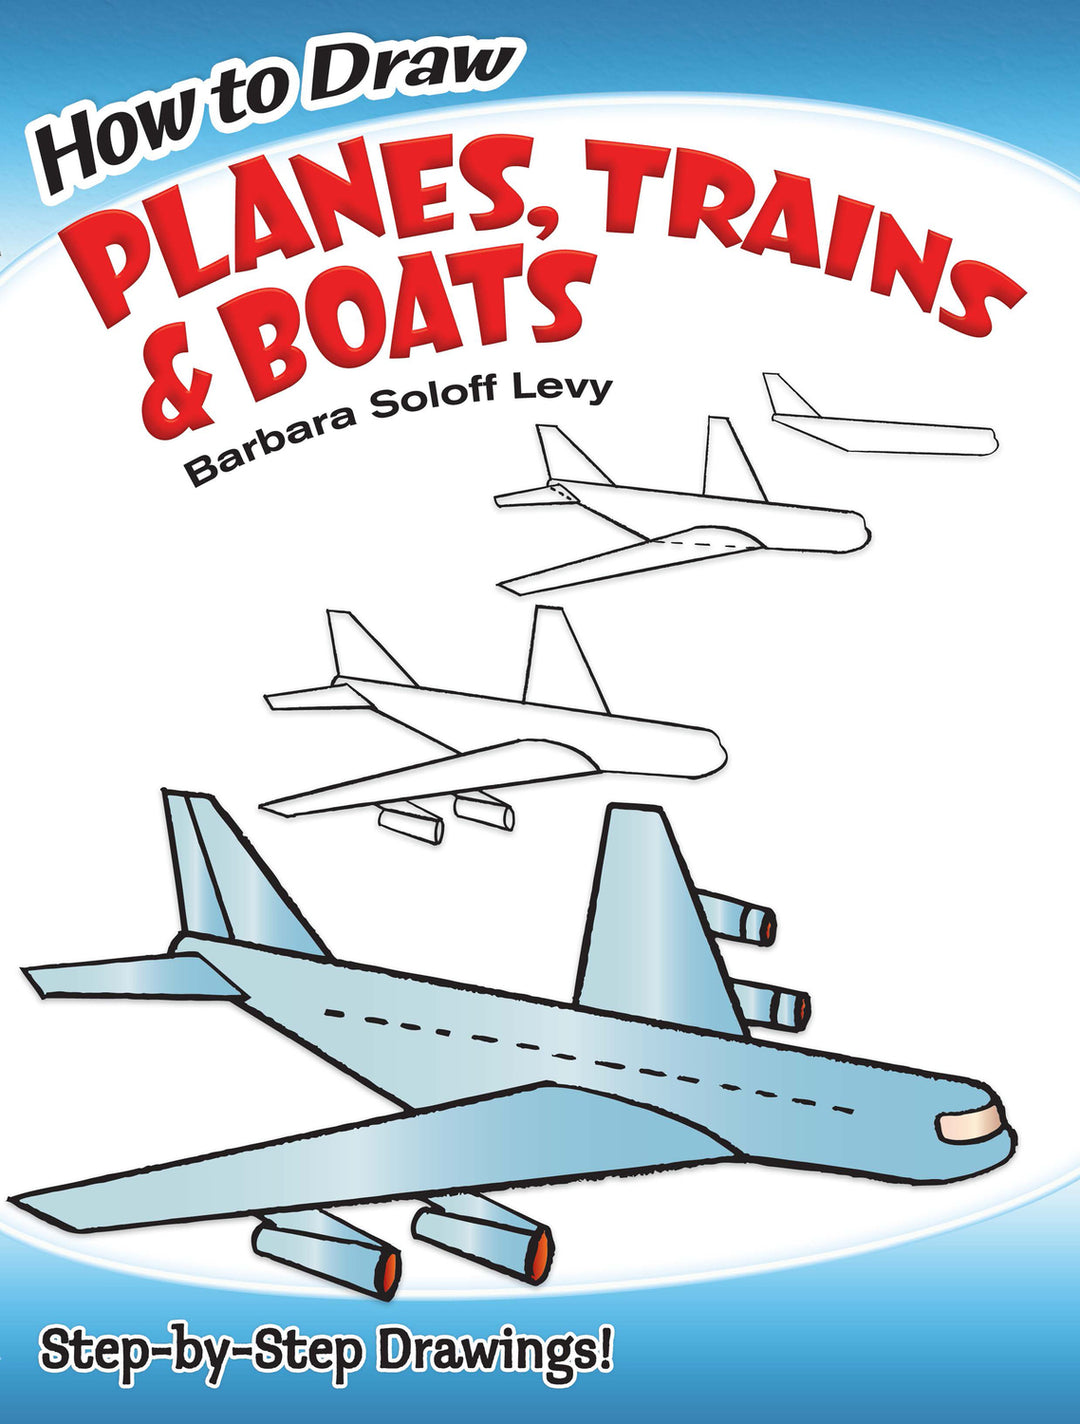 How to Draw Planes, Trains and Boats: Step-by-Step Drawings!